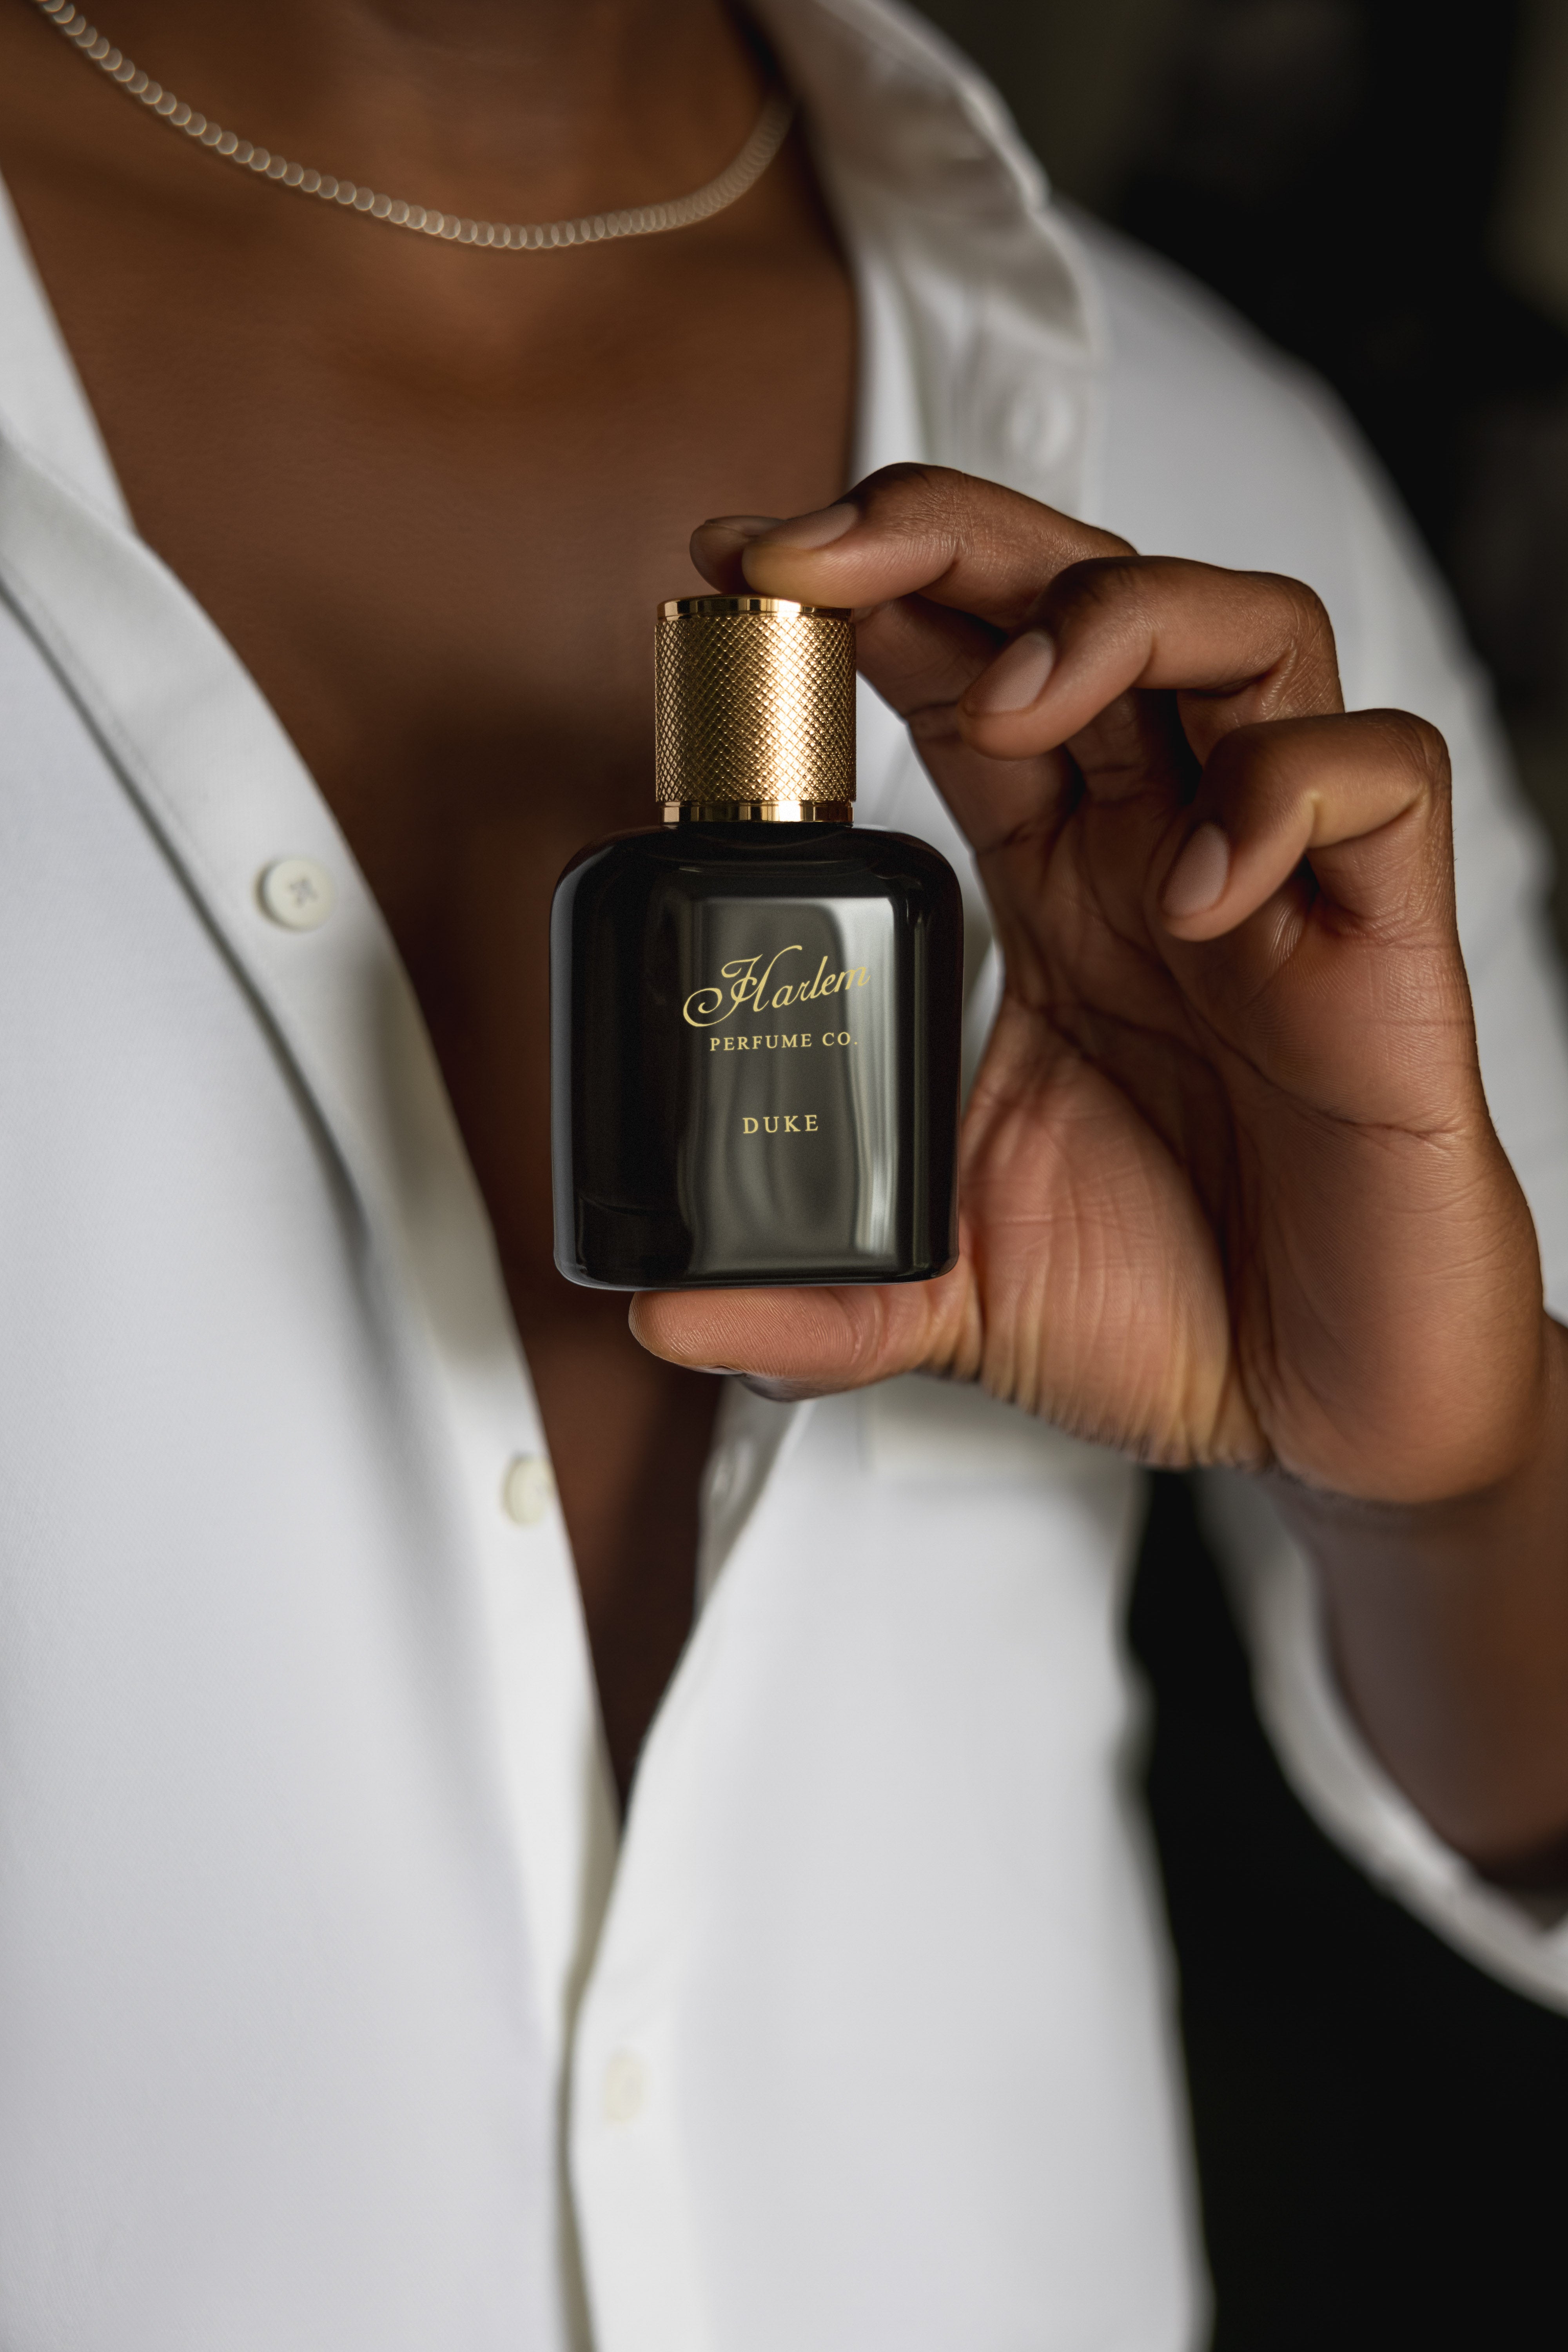 This is an image of our Duke perfume bottle, held by a man's hand against his chest as he wears a white button down shirt.